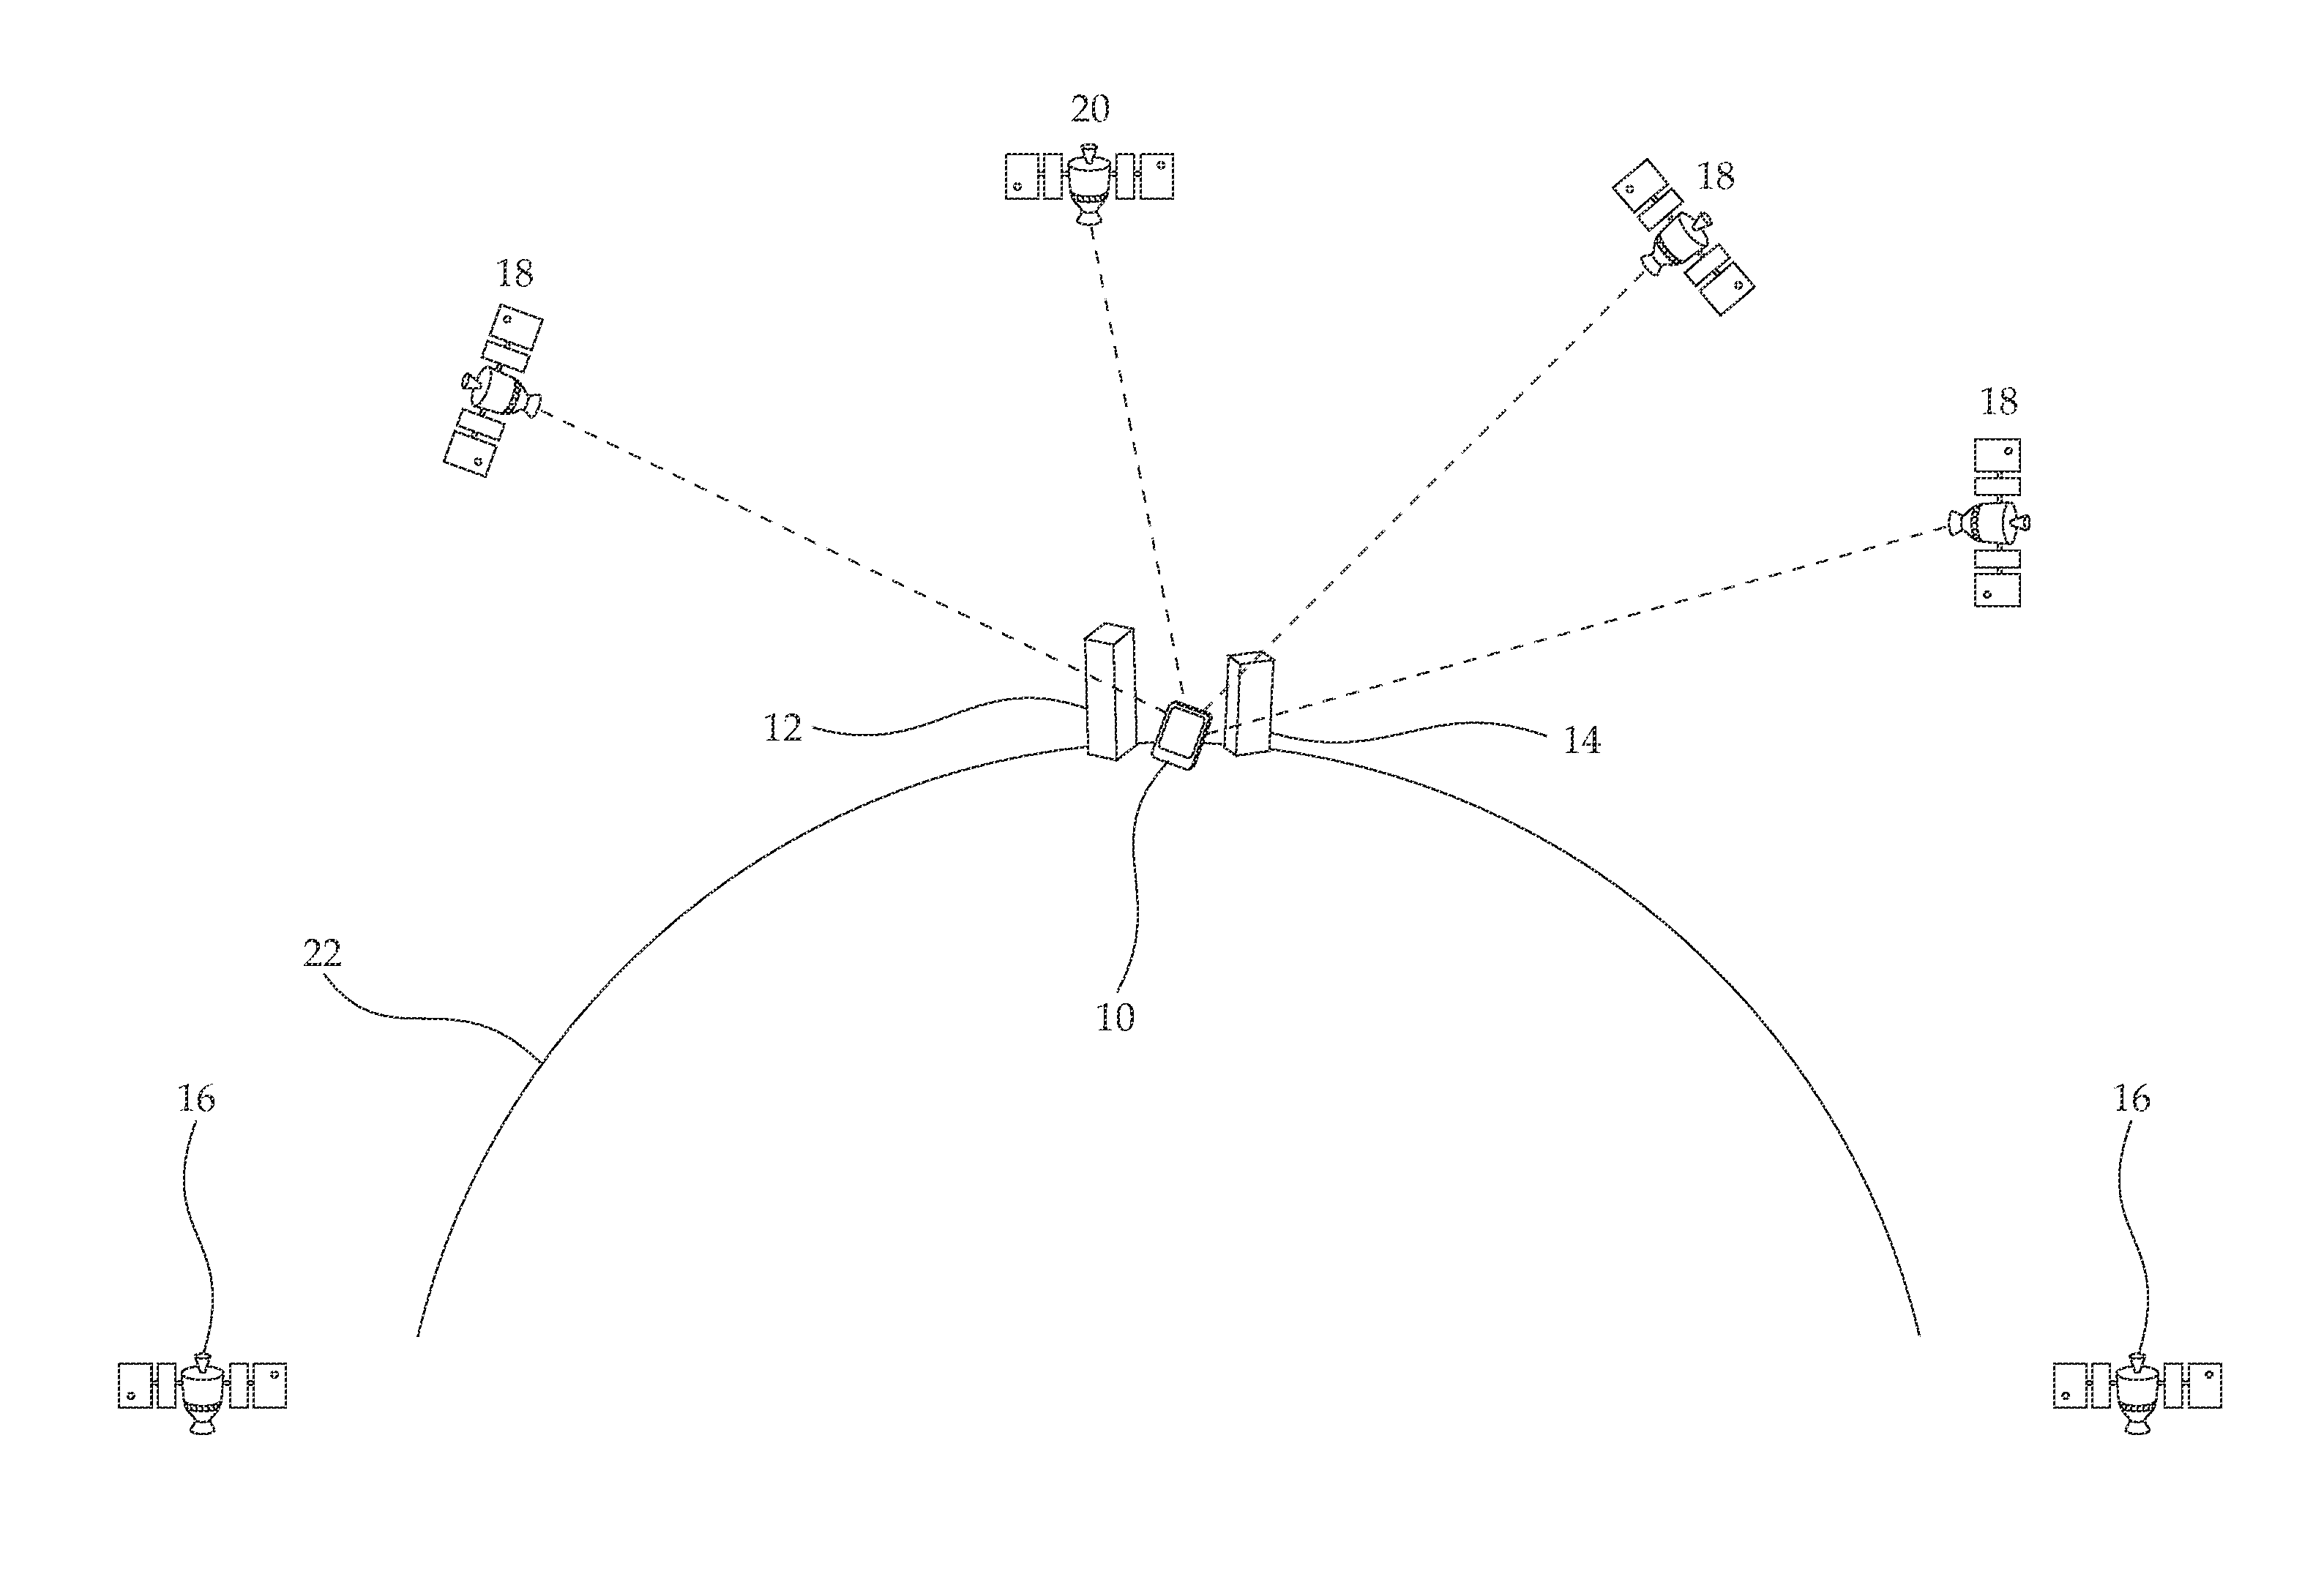 Methods, devices, and uses for calculating a position using a global navigation satellite system